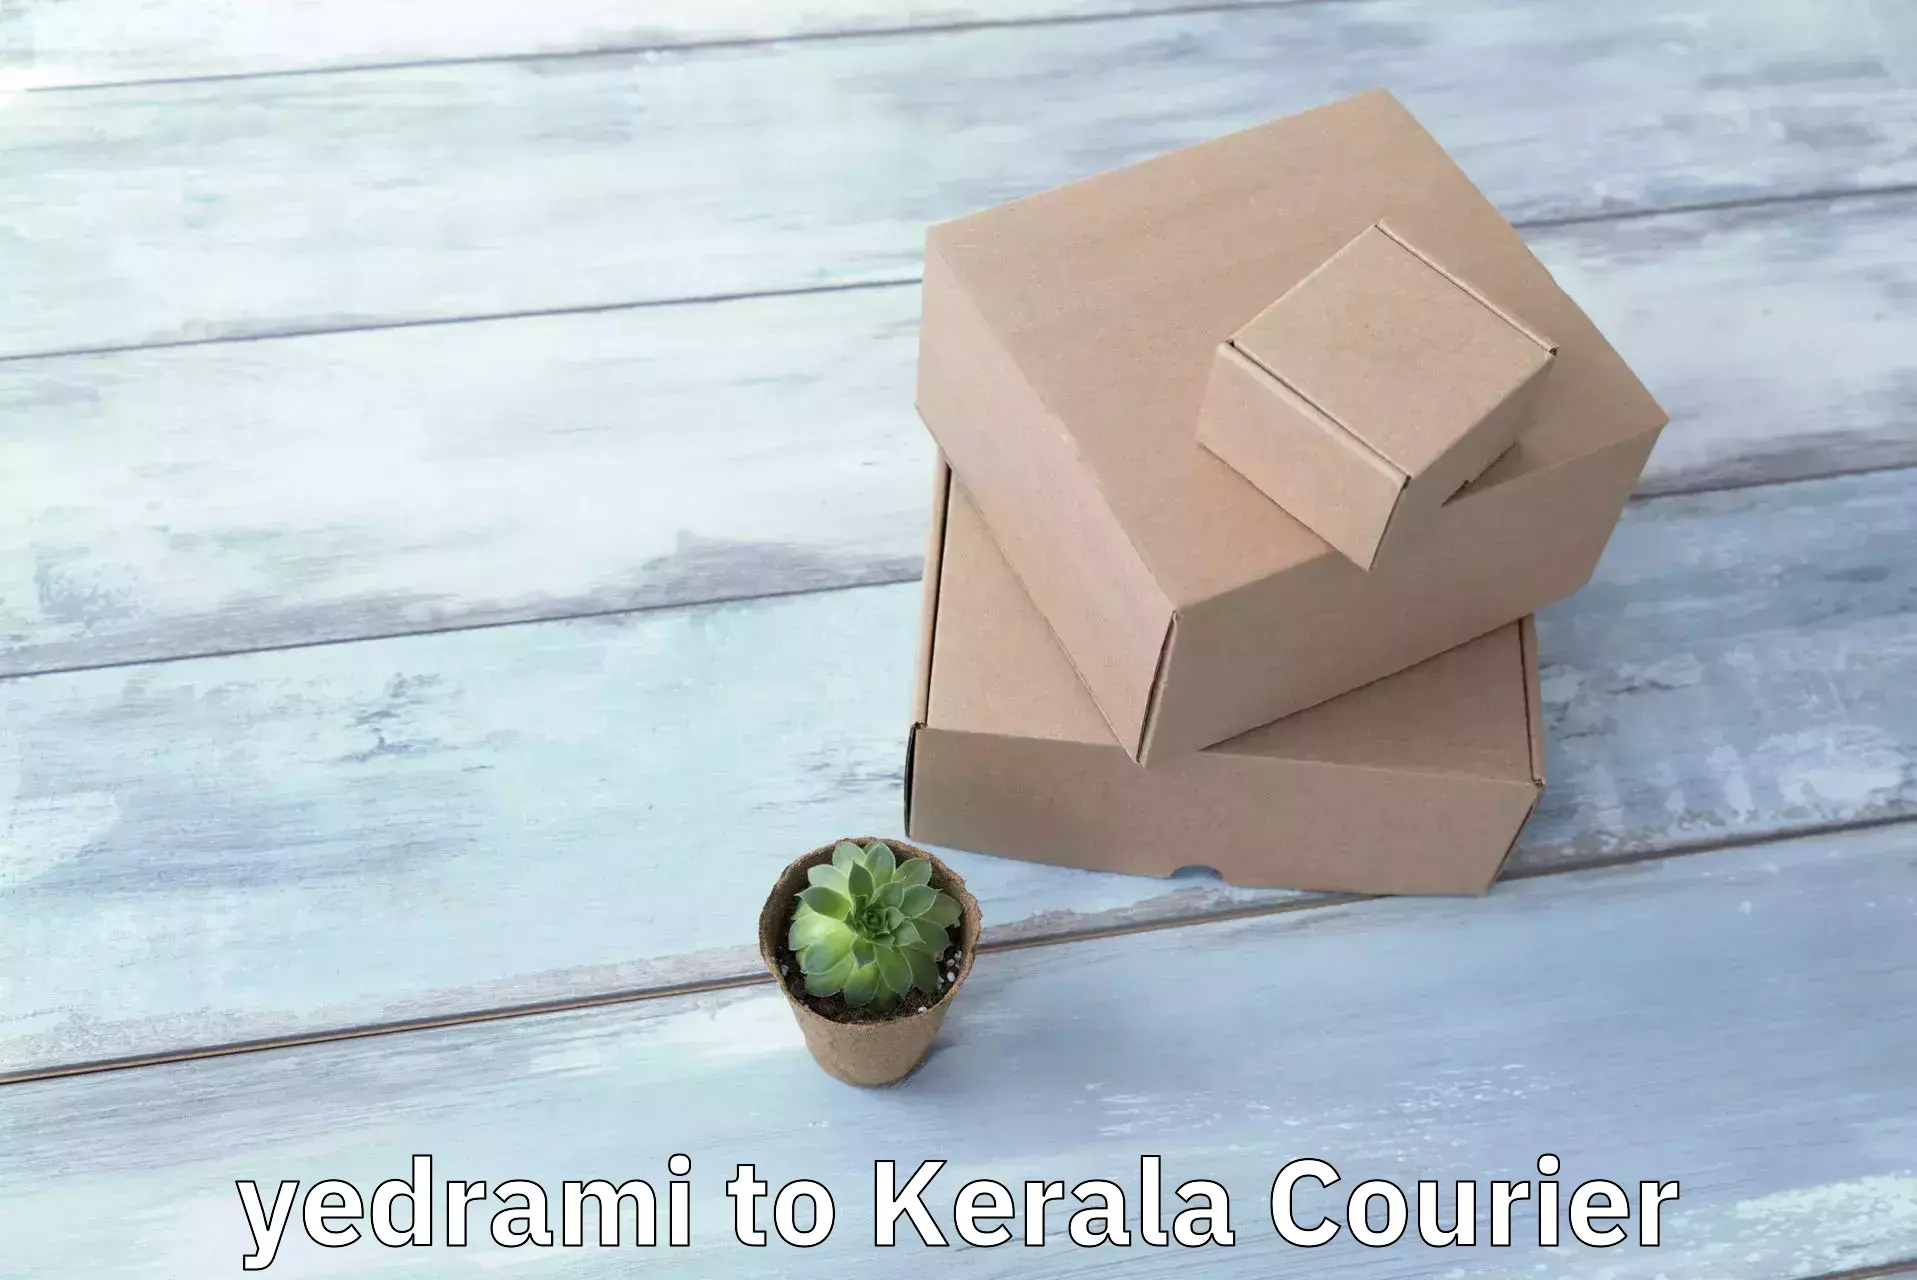 Next day courier yedrami to IIT Palakkad